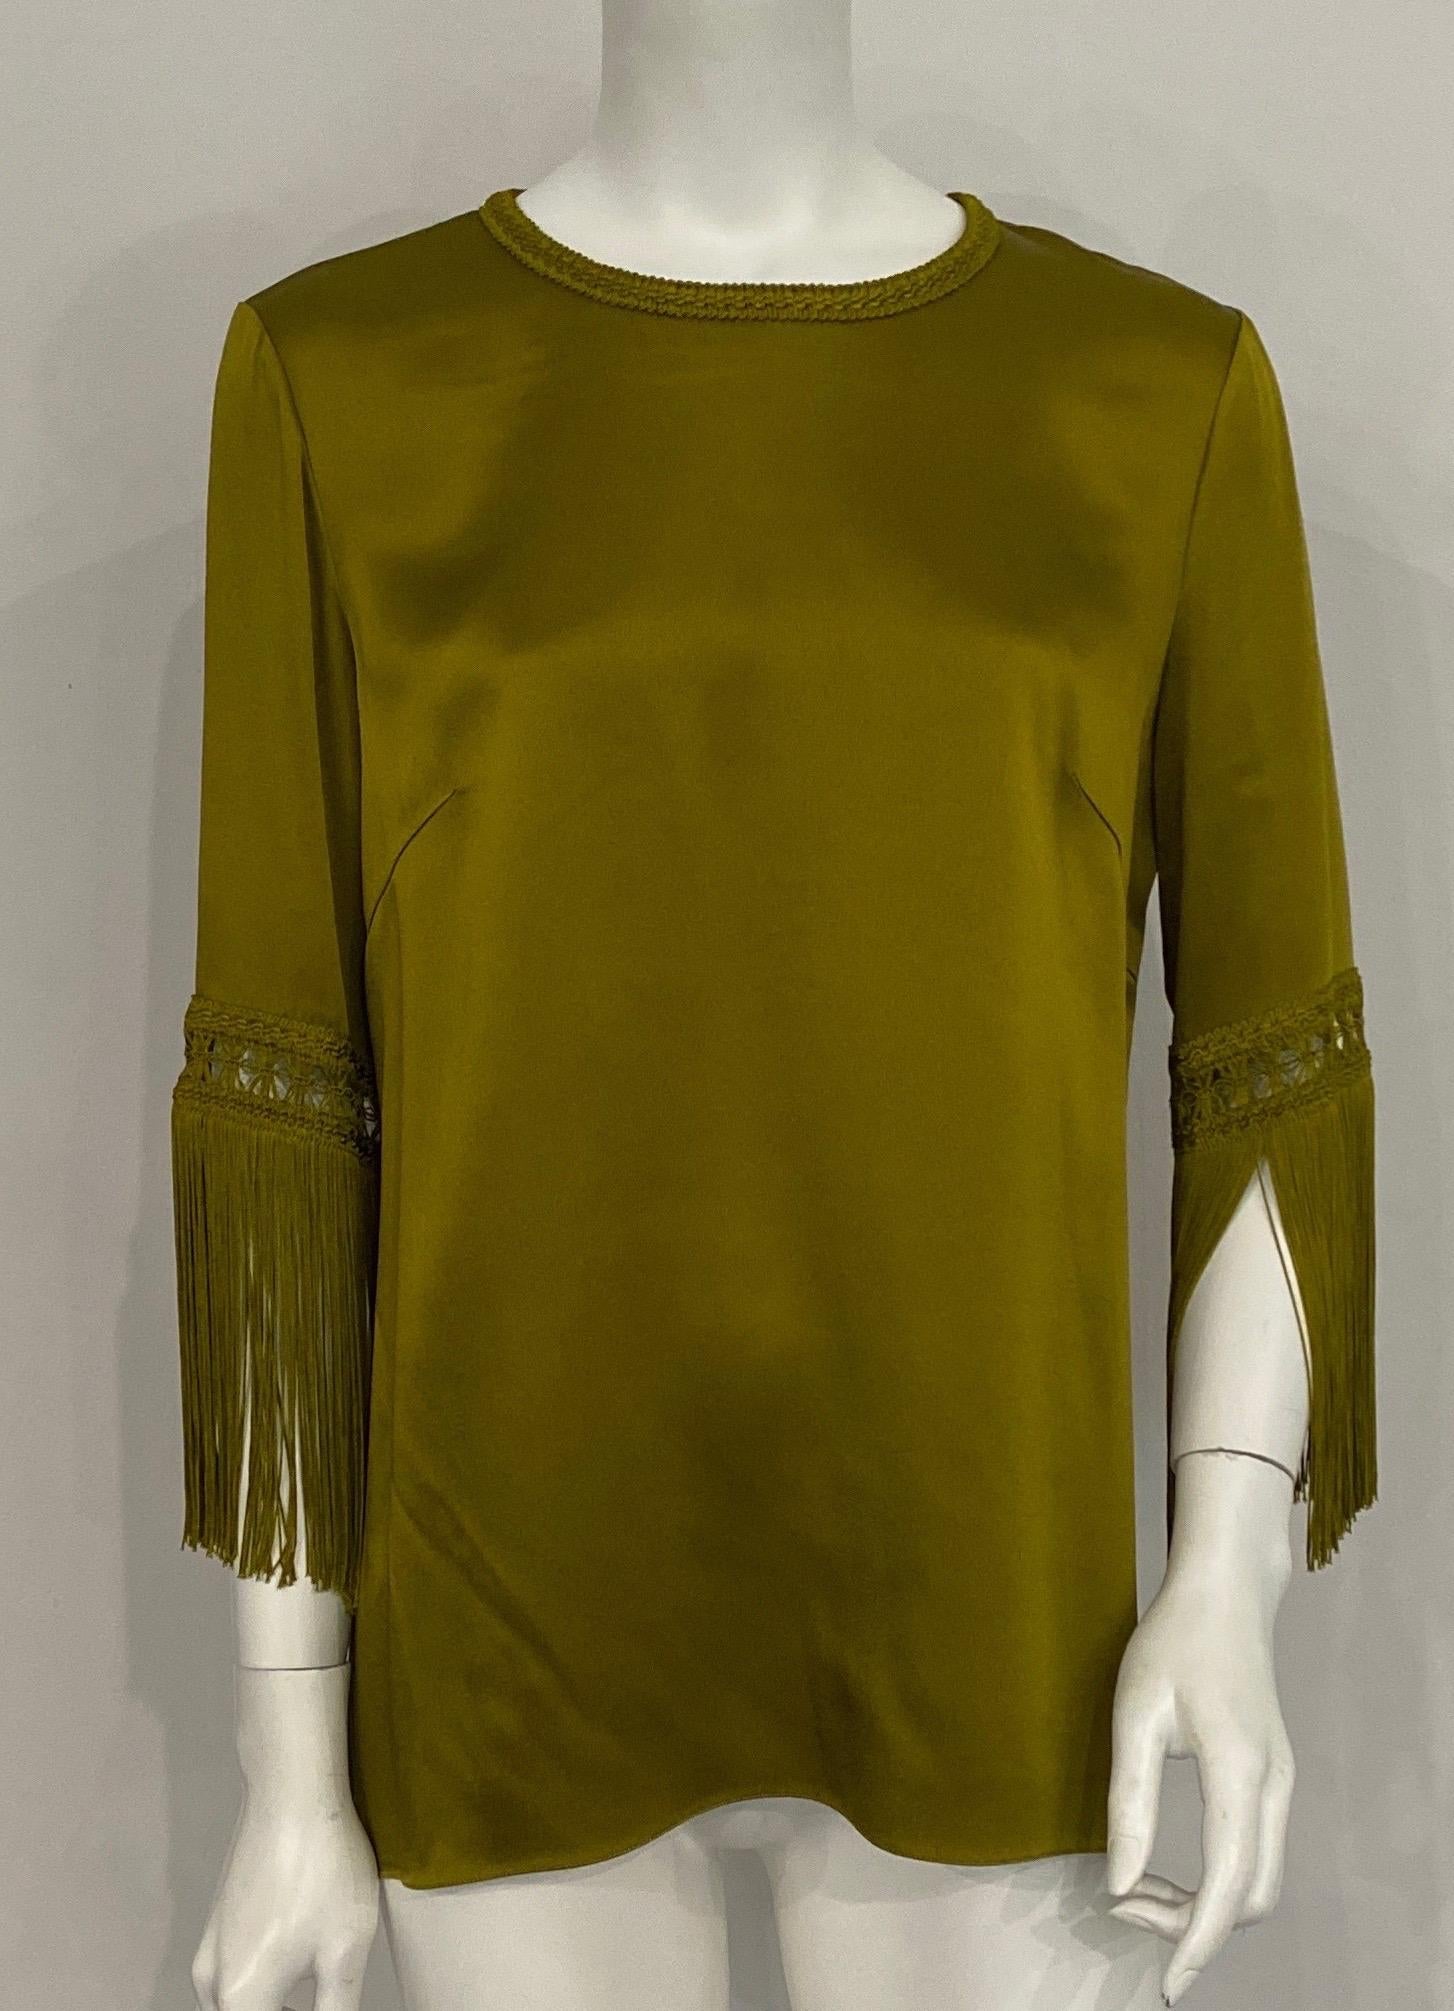 Andrew GN Olive Satin Looking Fringe Sleeve Top -Size 40  This top is actually made of a combination acetate/viscose, has a round neckline, 12